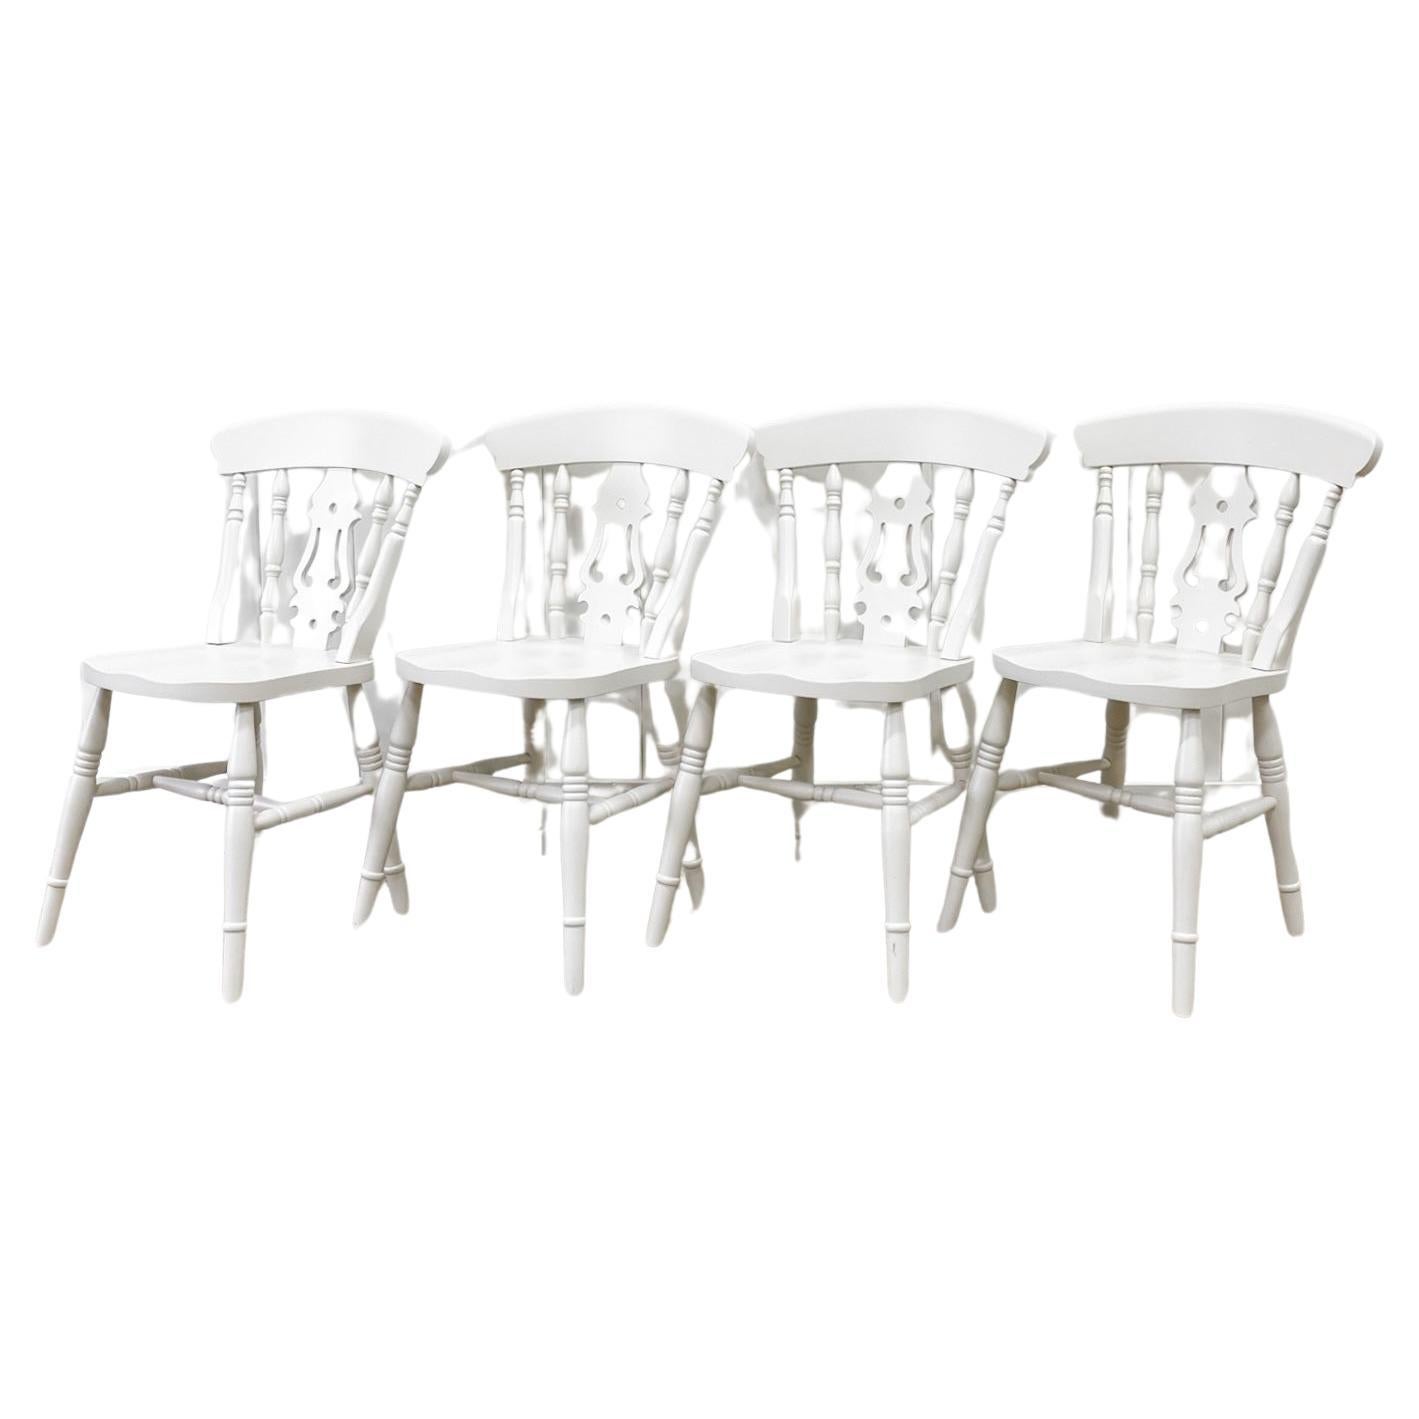 A Vintage Set of 4 White Fiddleback Back Chairs